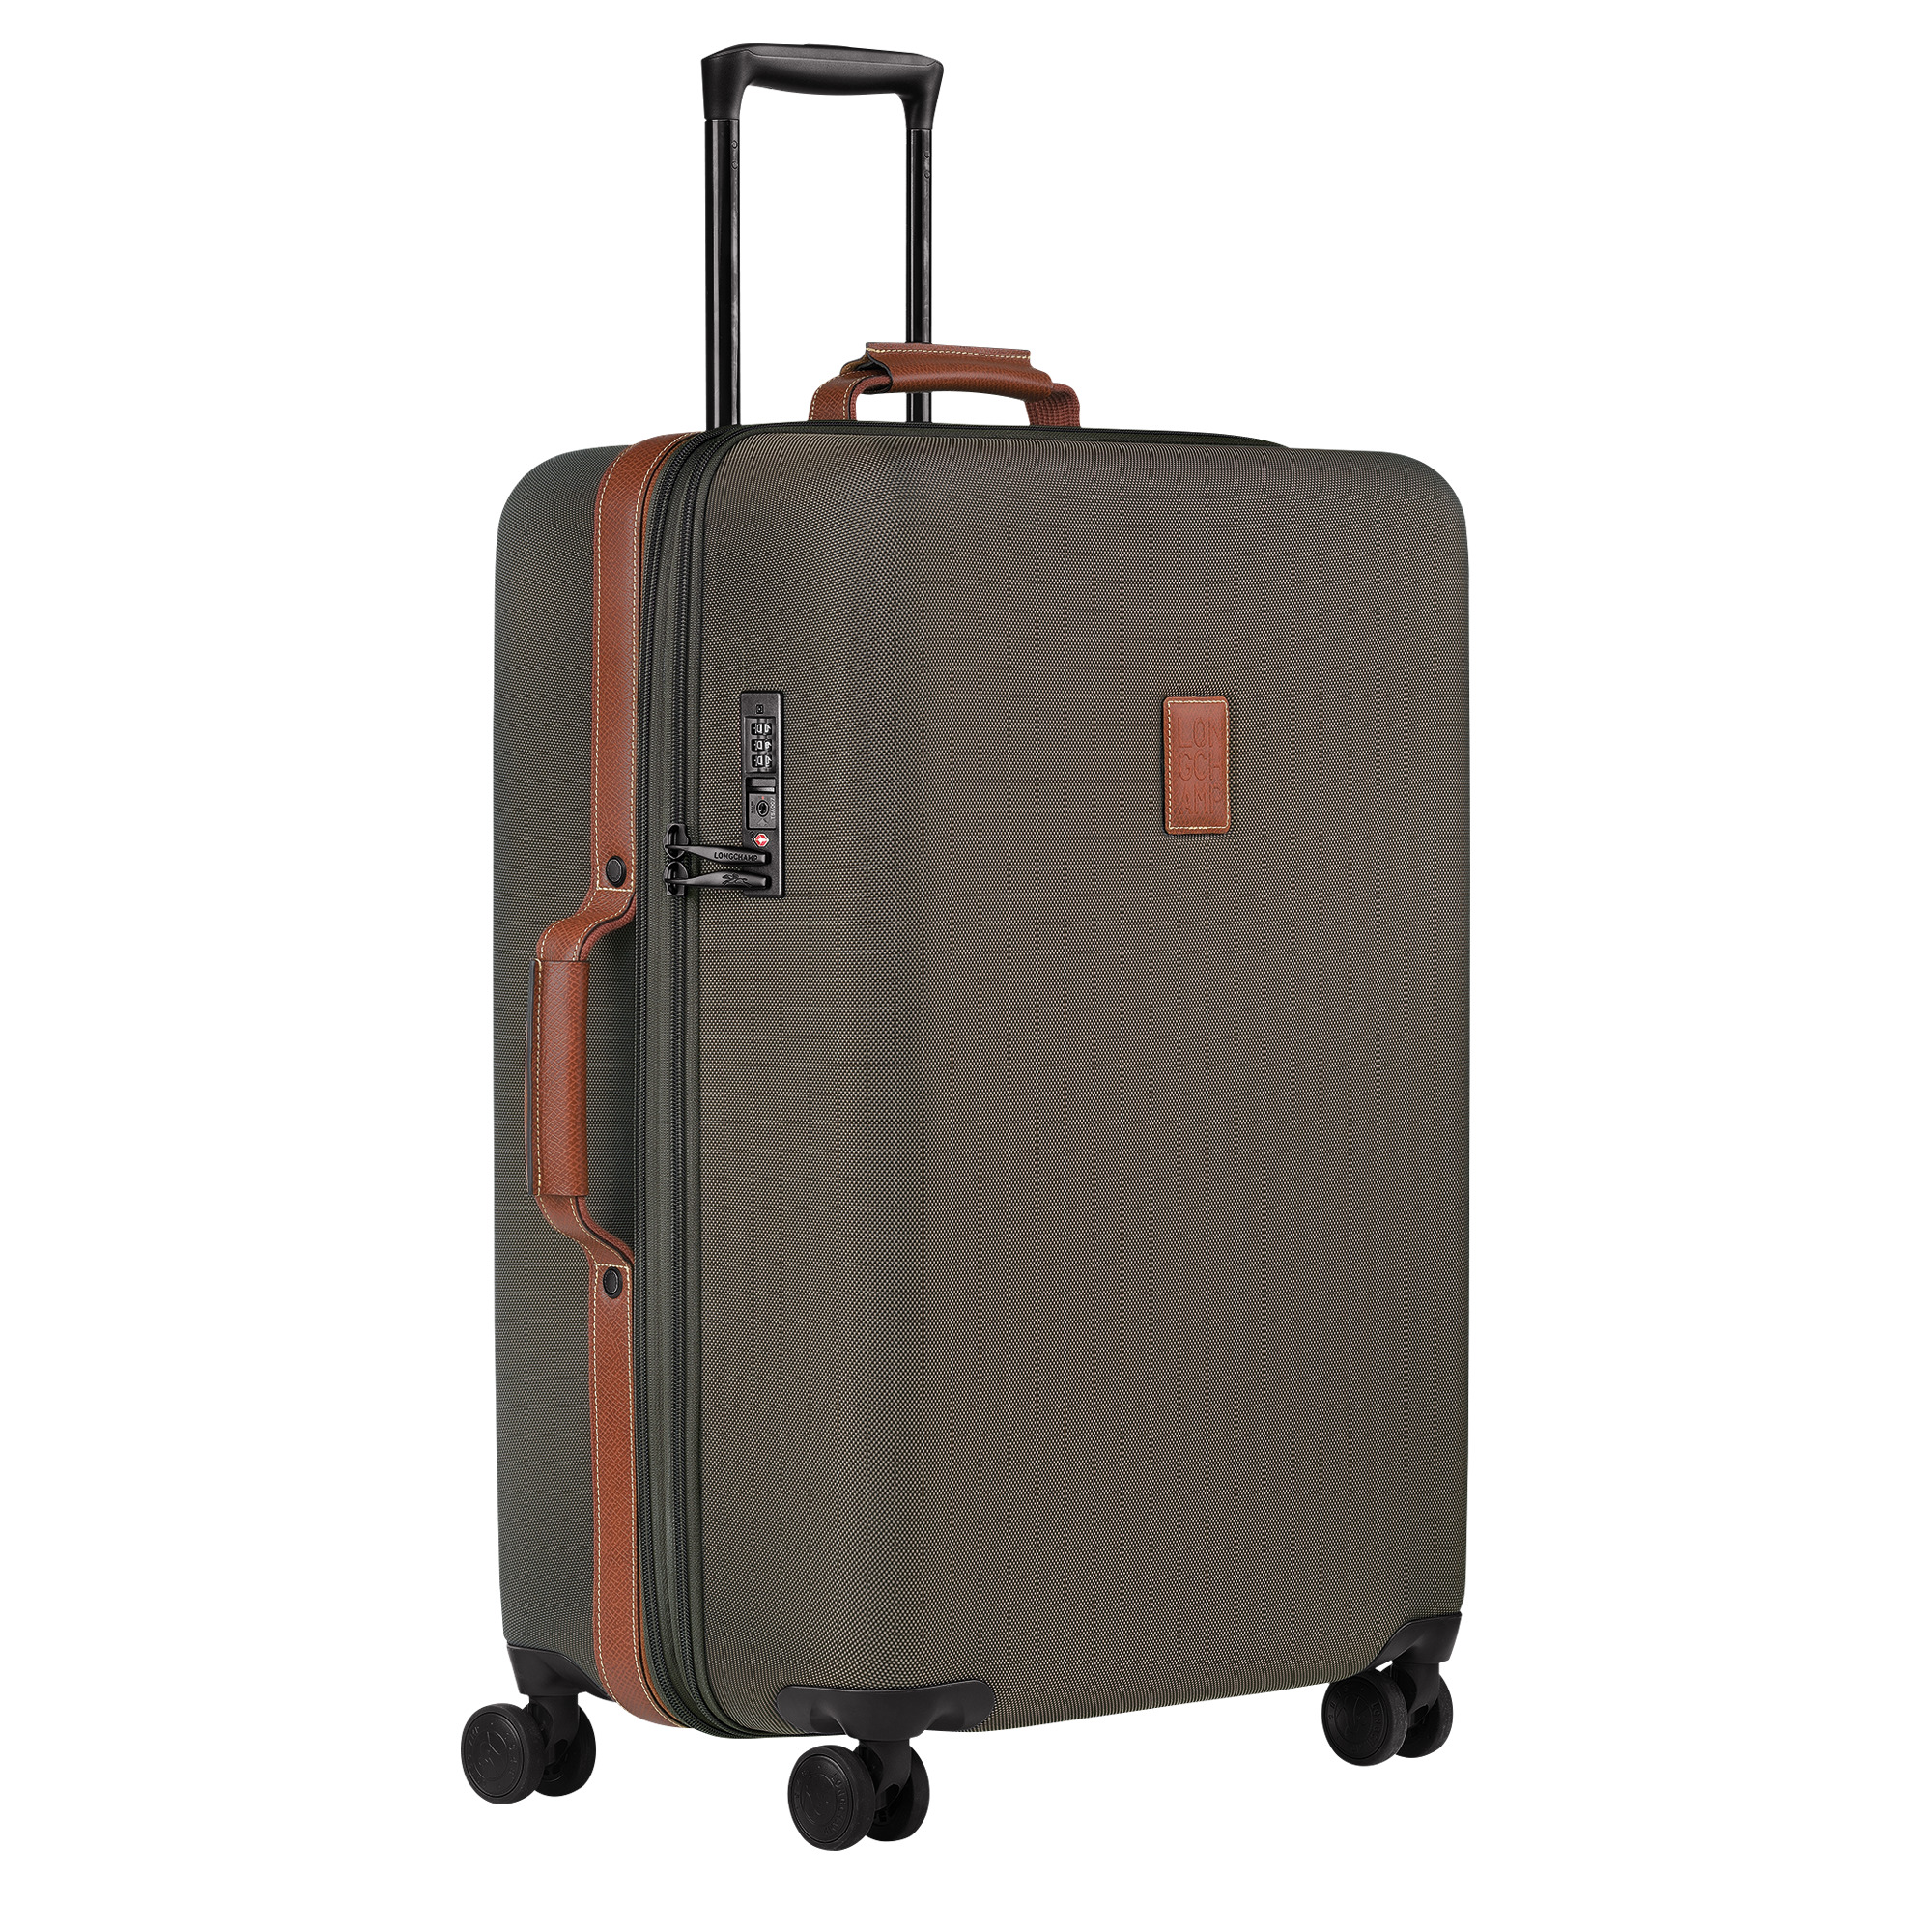 Boxford L Suitcase Brown - Recycled canvas - 2